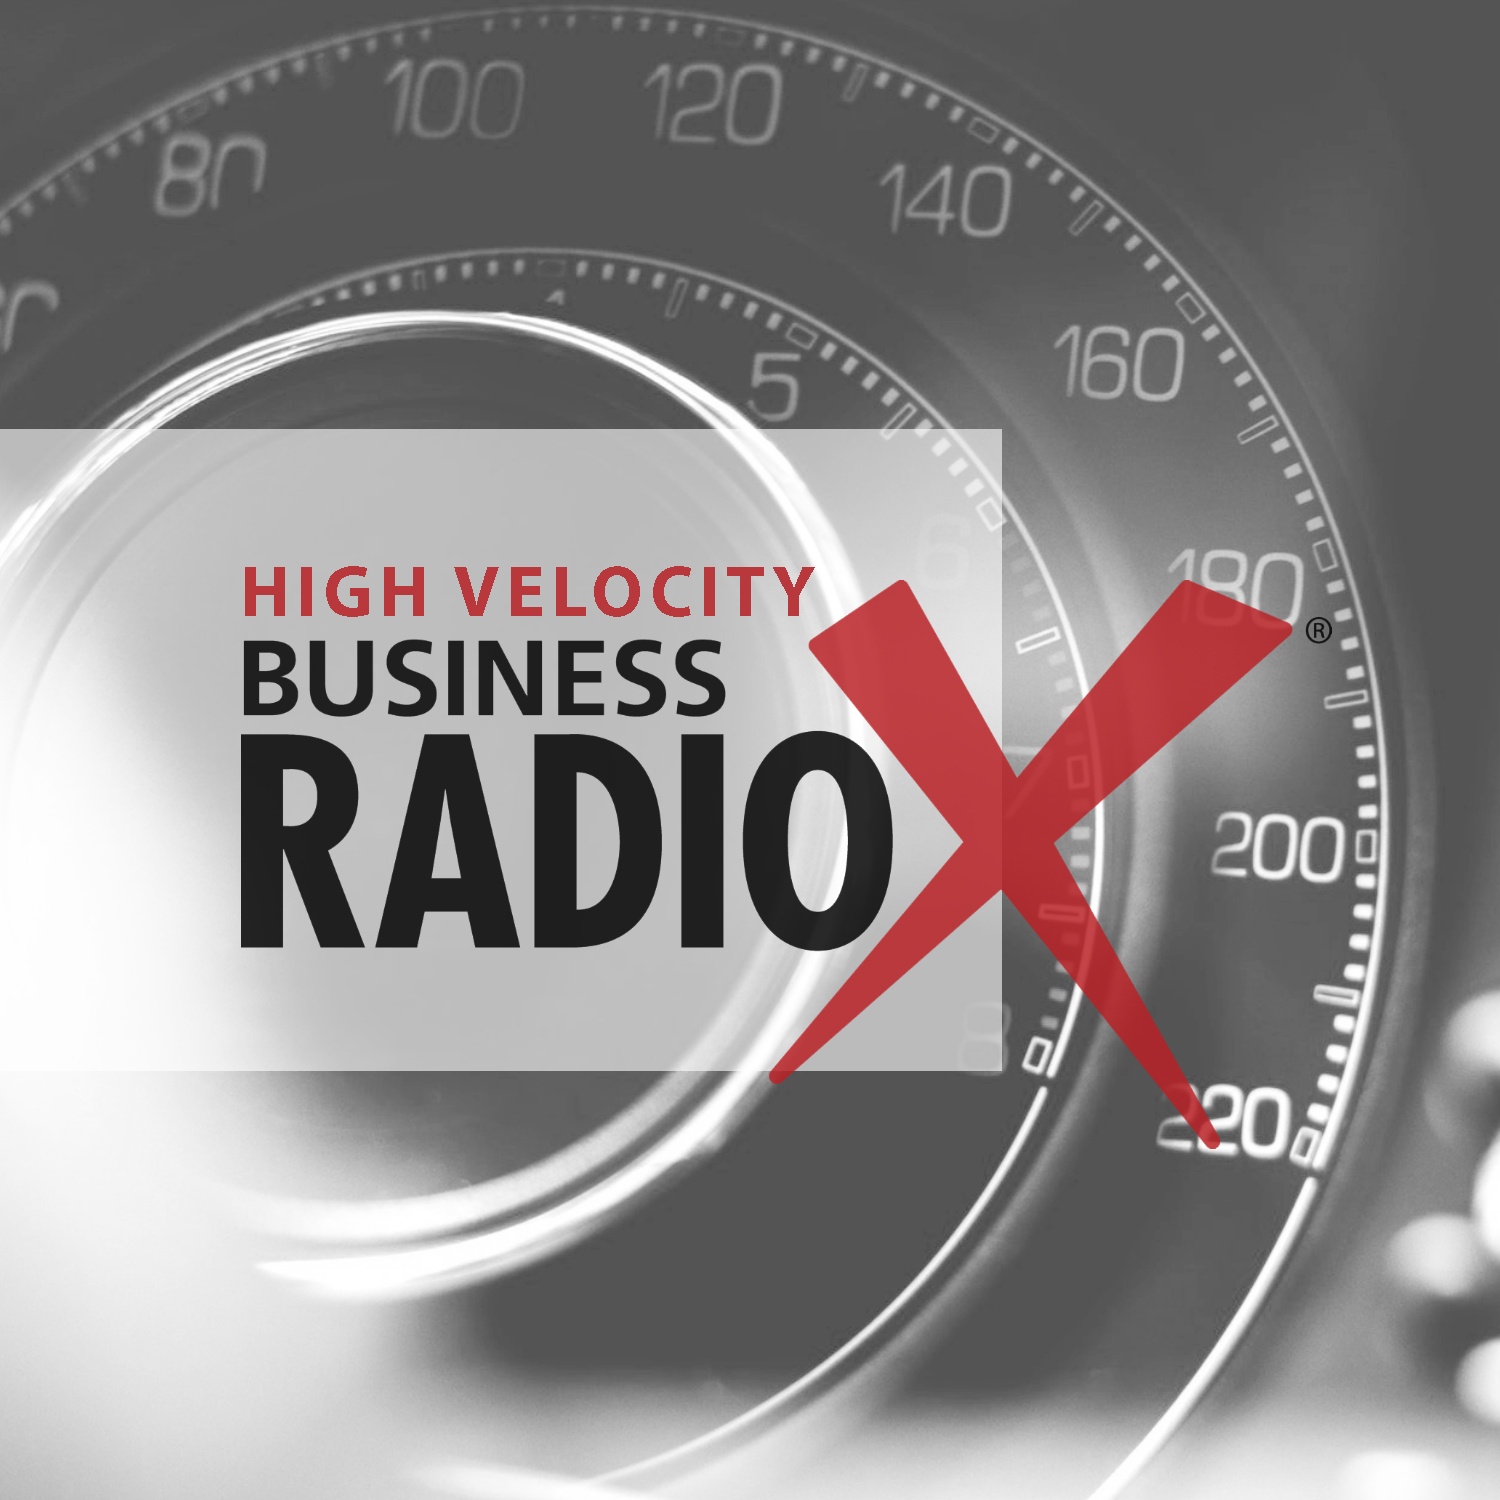 High Velocity Radio Debuts With Guests Don Rigby & Steve Cadley